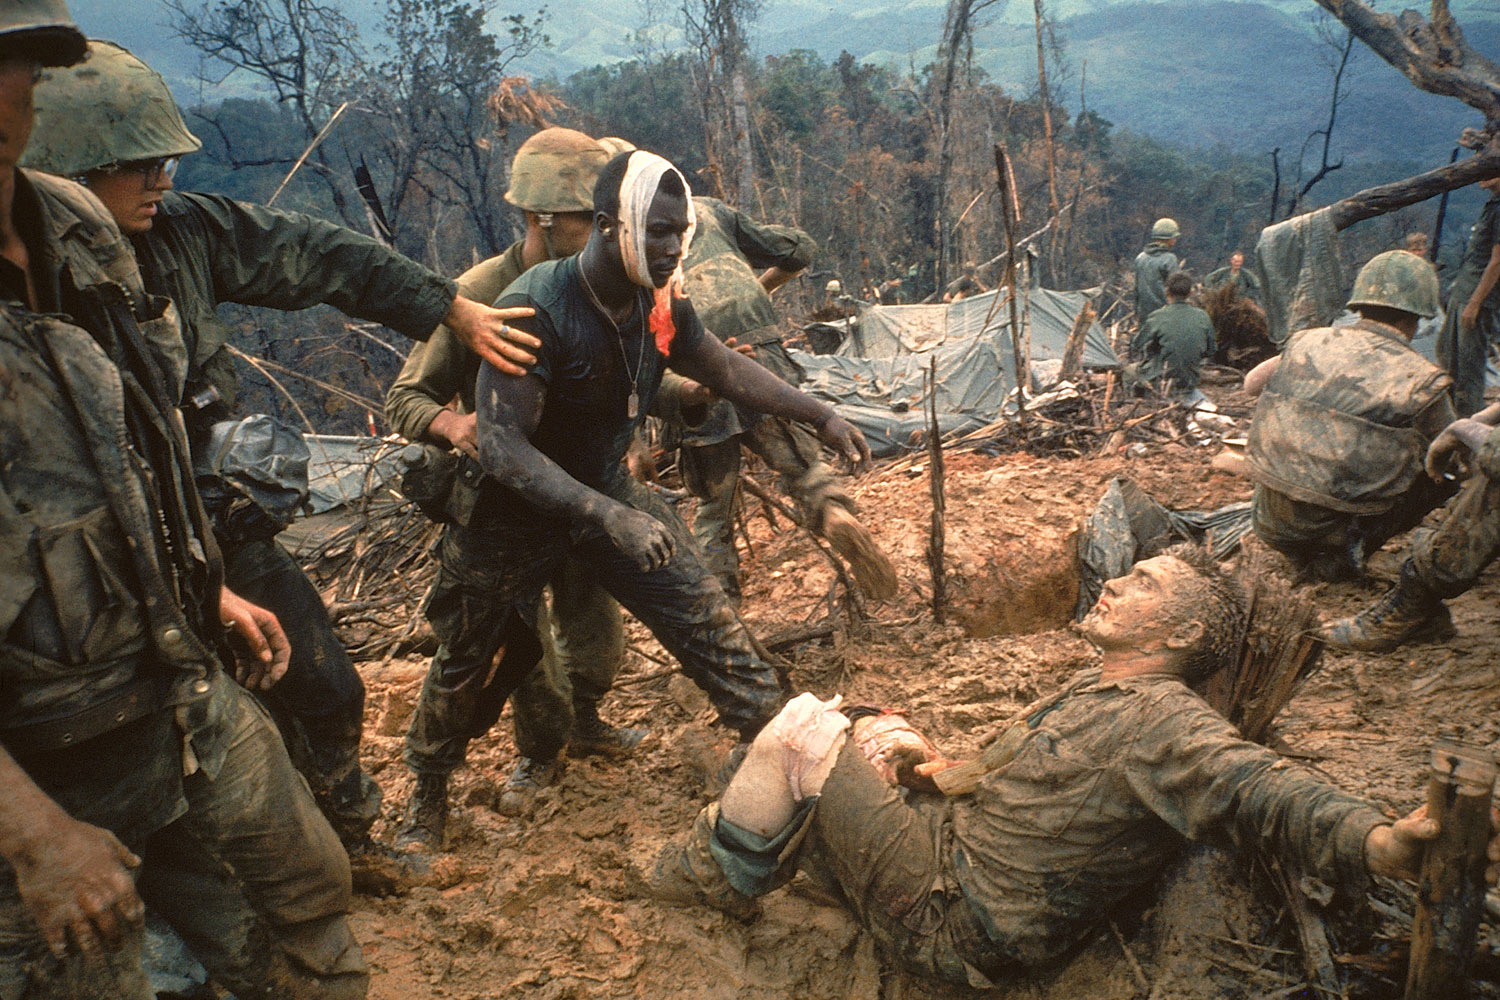 Wounded Marine Gunnery Sgt. Jeremiah Purdie moves to comfort a stricken comrade after a fierce firefight for Hill 484 during the Vietnam War, 1966